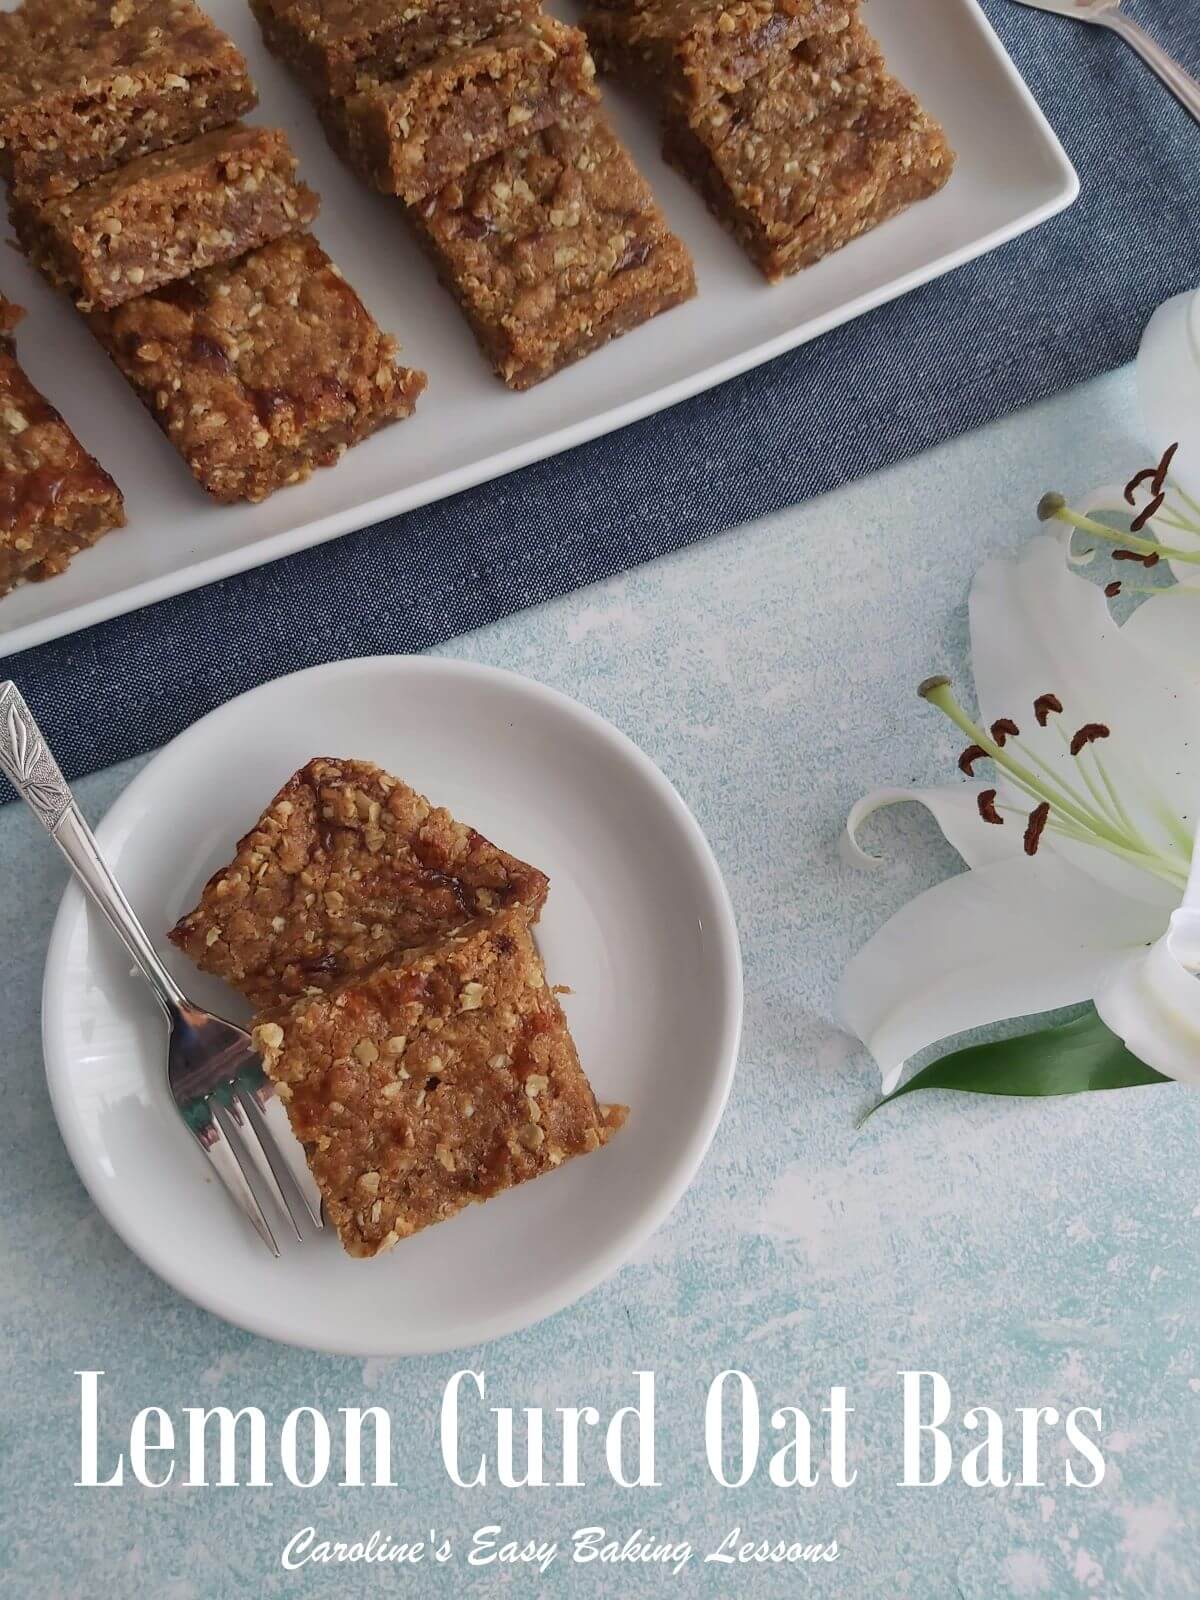 Lemon curd oat bars on a latter and 2 on a small plate served with the title.